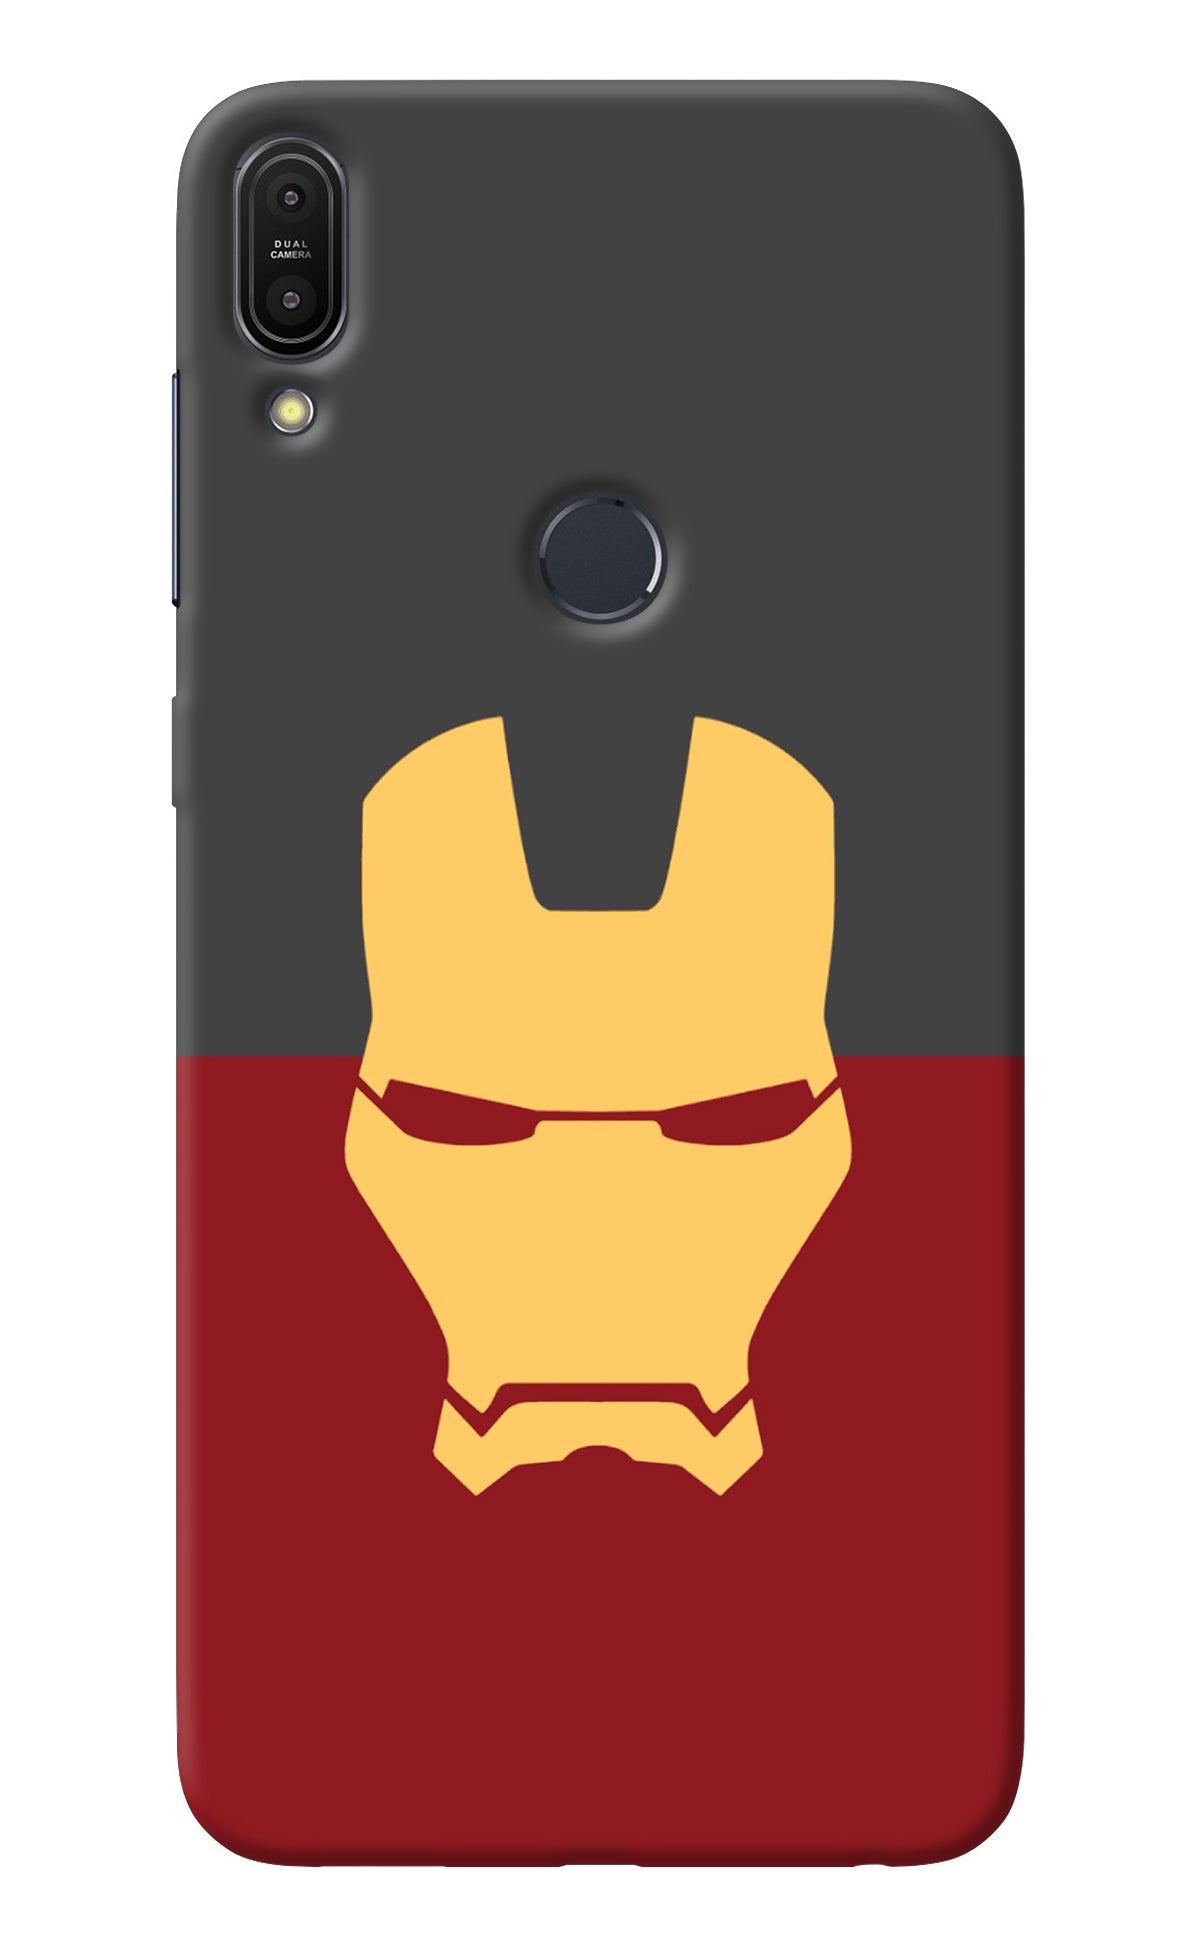 Ironman Asus Zenfone Max Pro M1 Back Cover